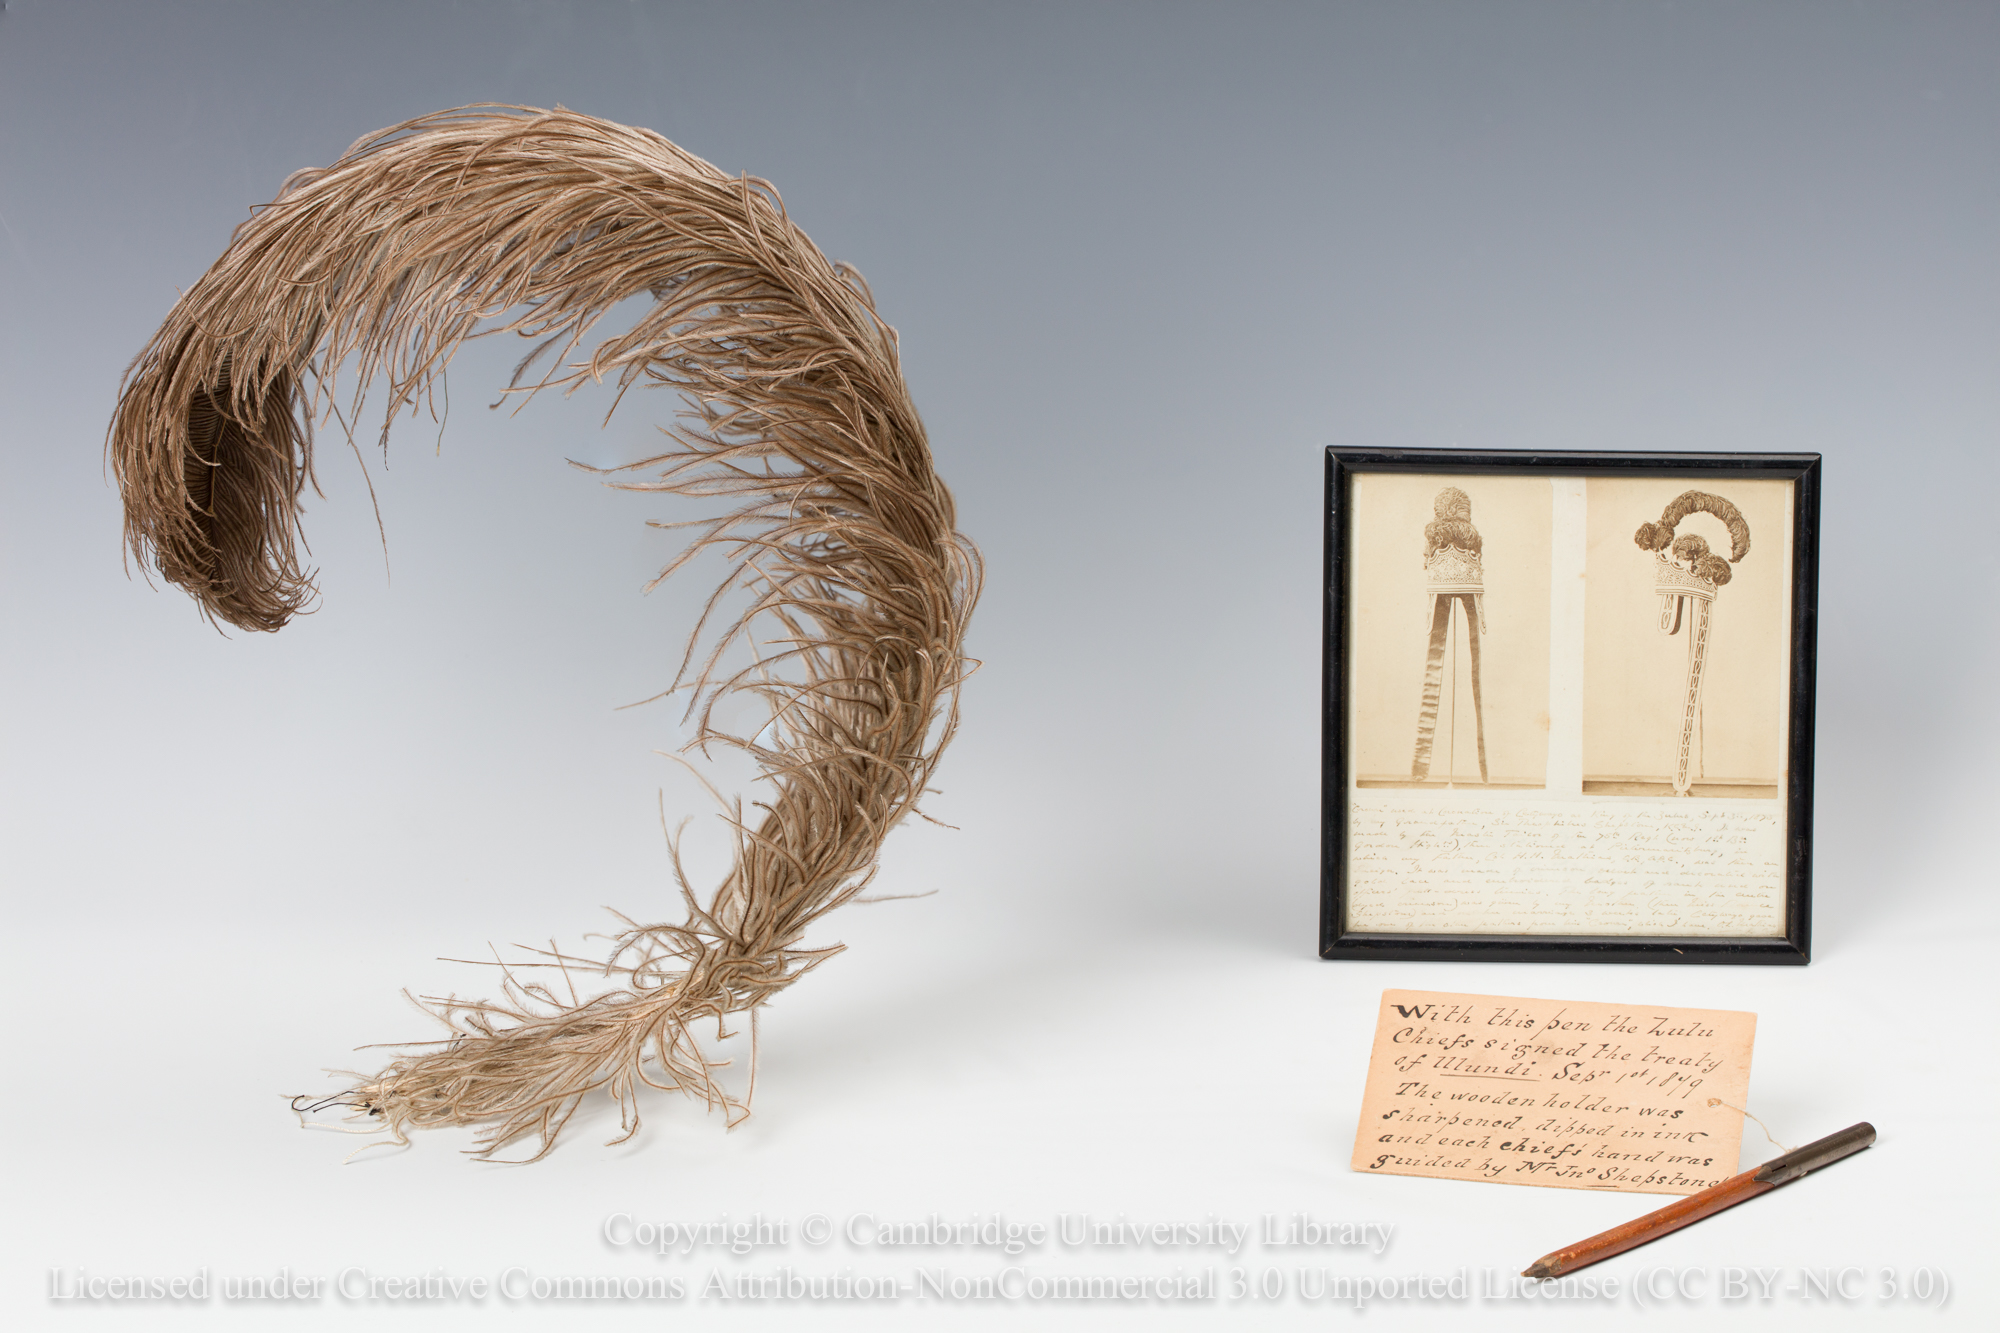 Ostrich feather from the crown of Cetshwayo ka Mpande, King of the Zulu and Treaty of Ulundi pen